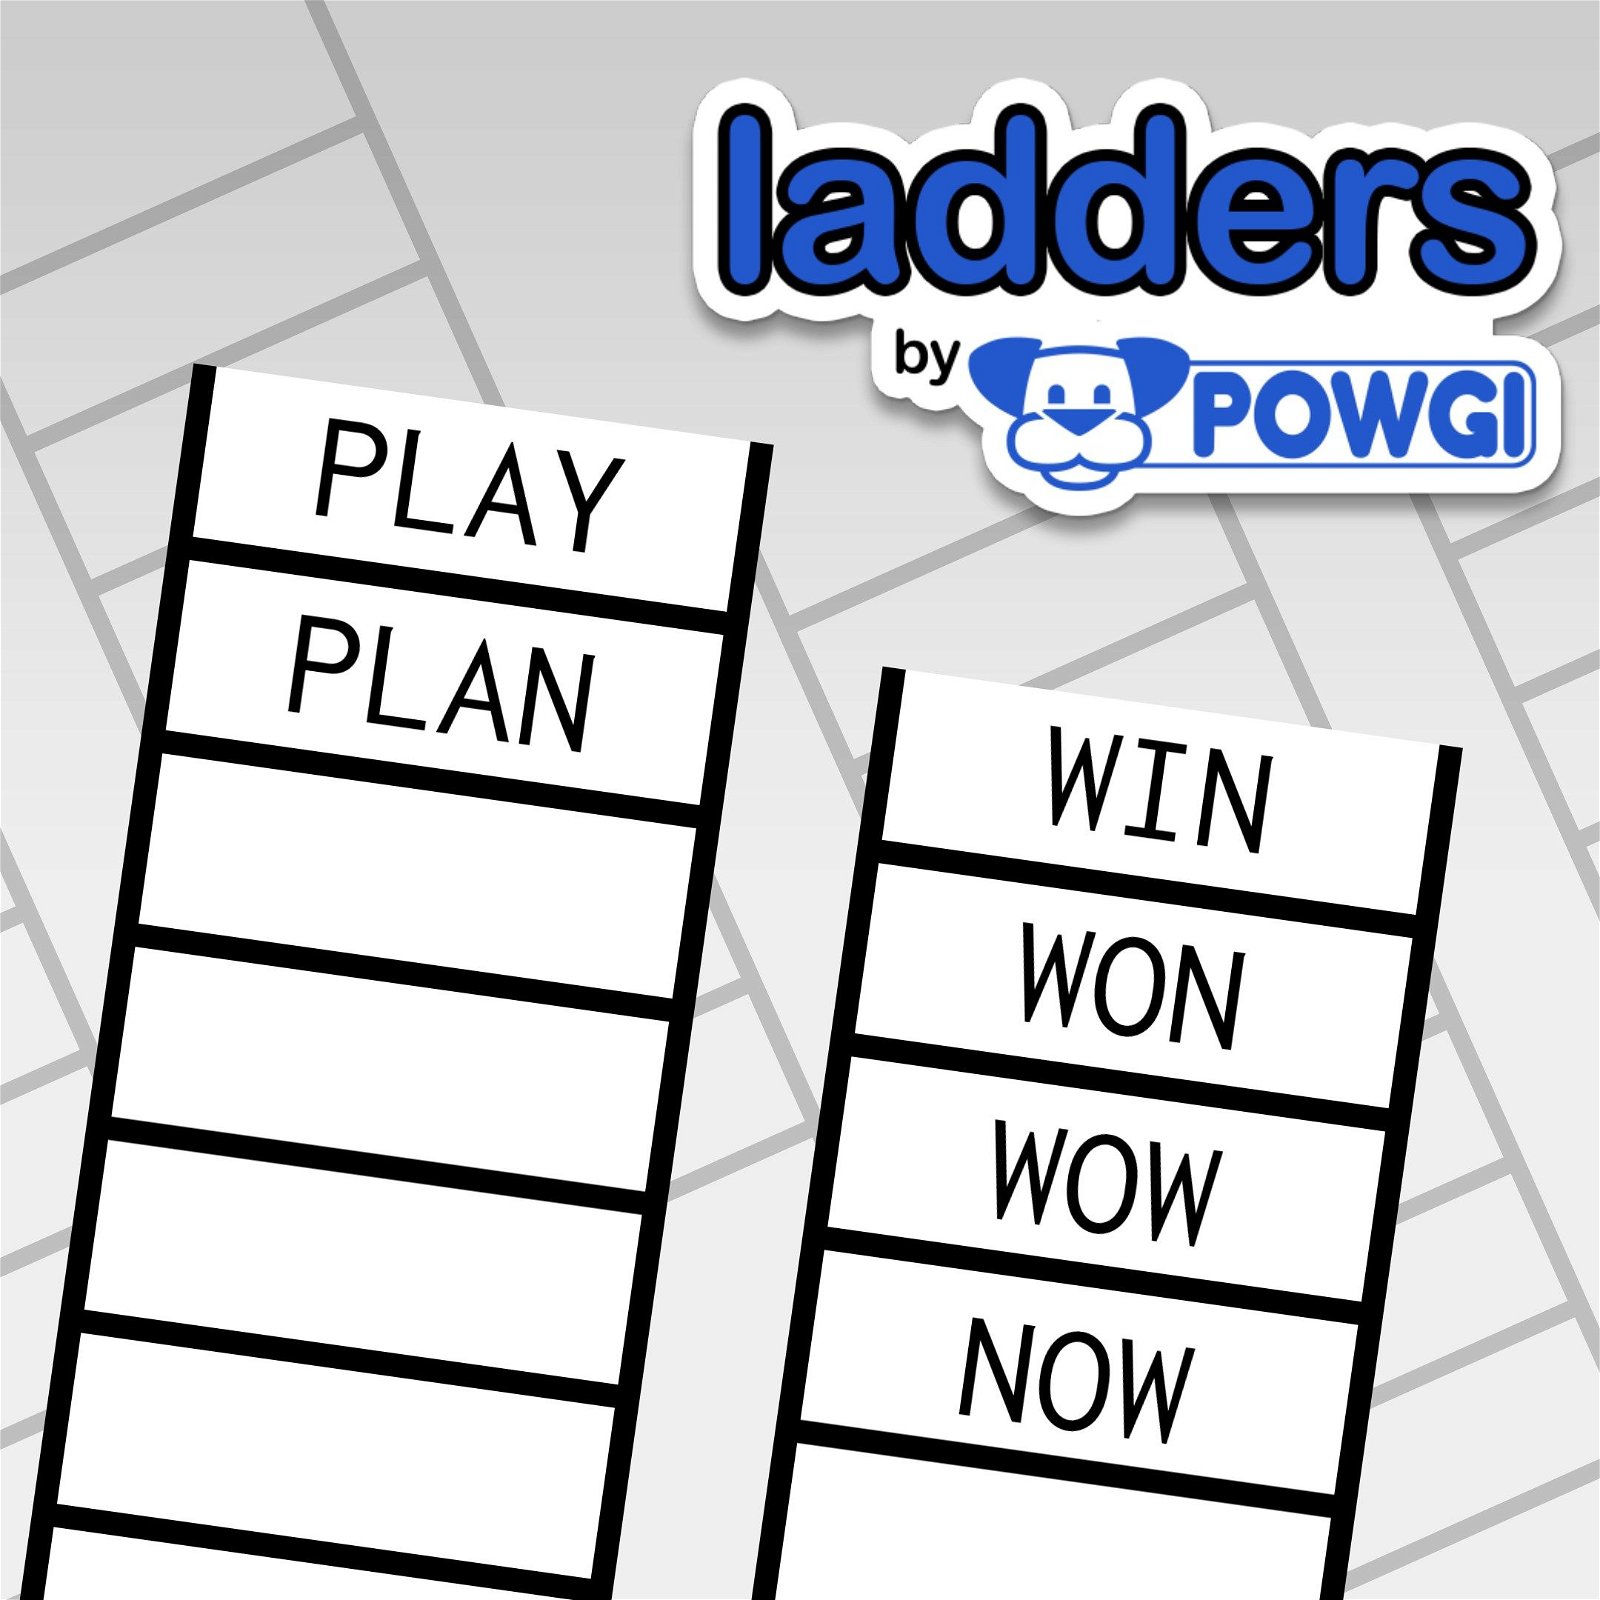 Image of Ladders by POWGI